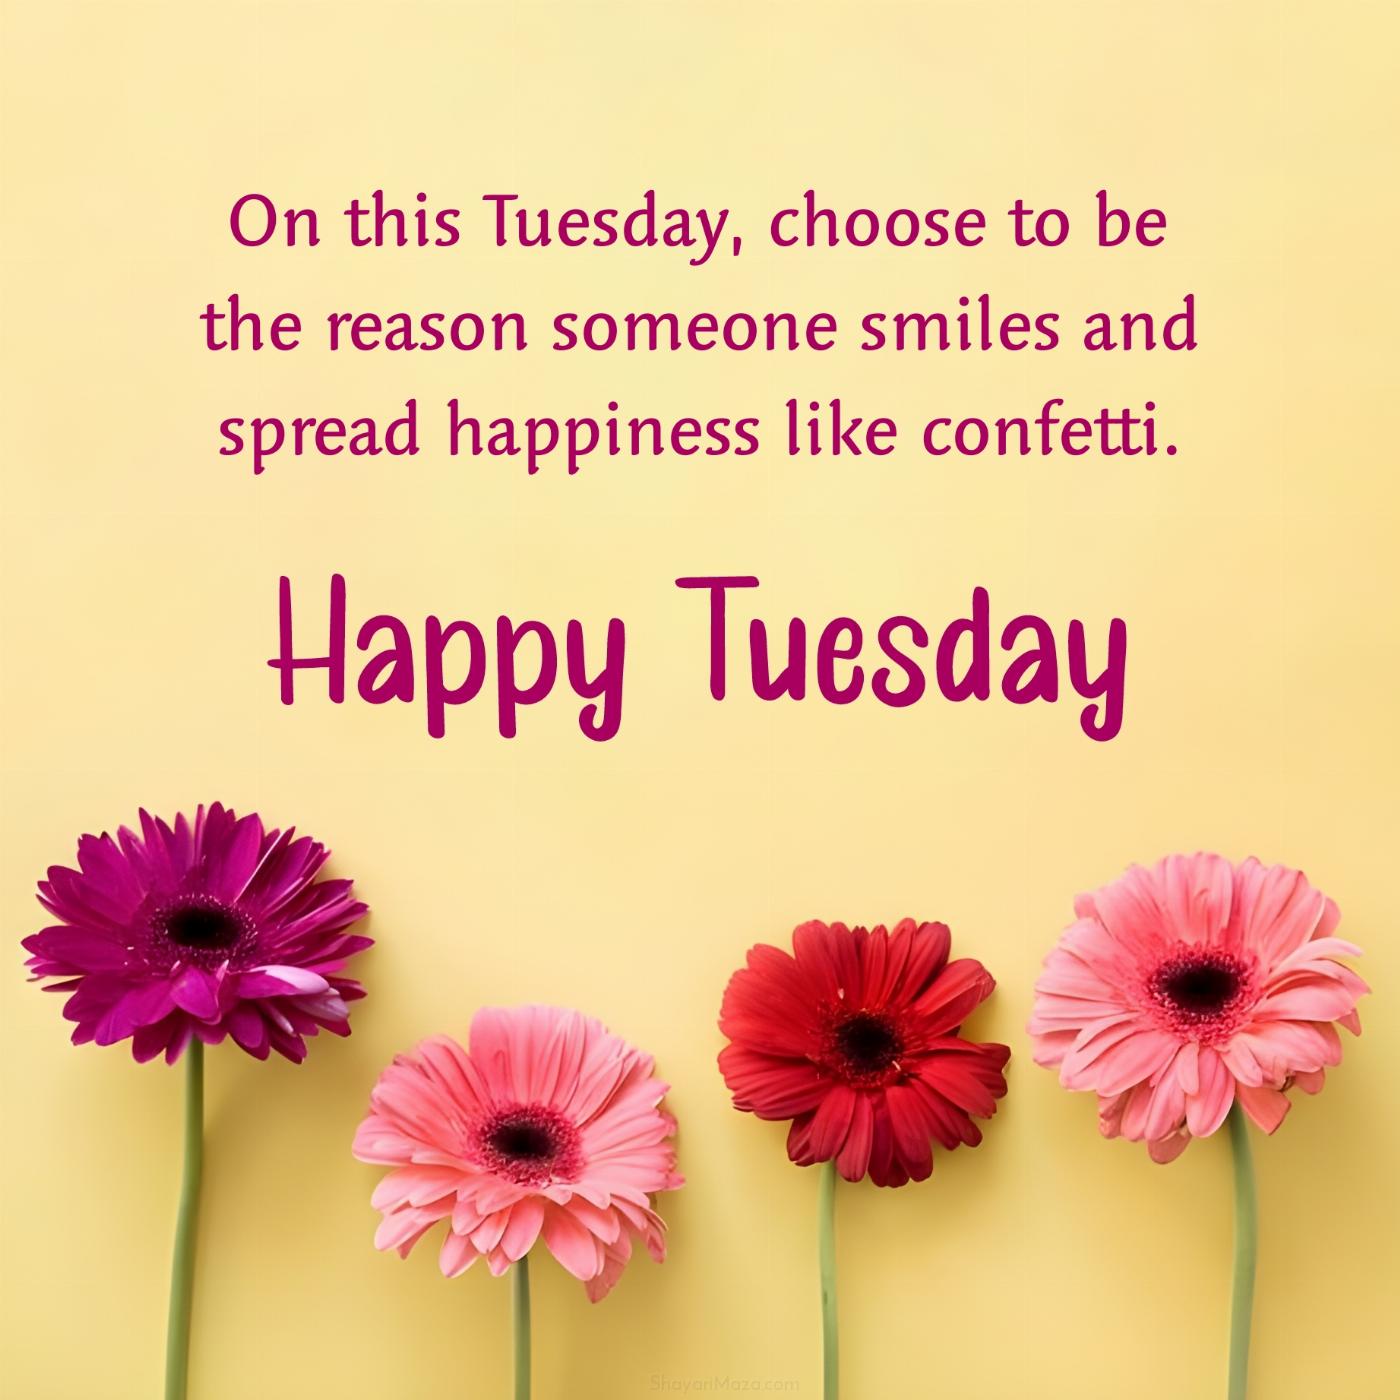 On this Tuesday choose to be the reason someone smiles